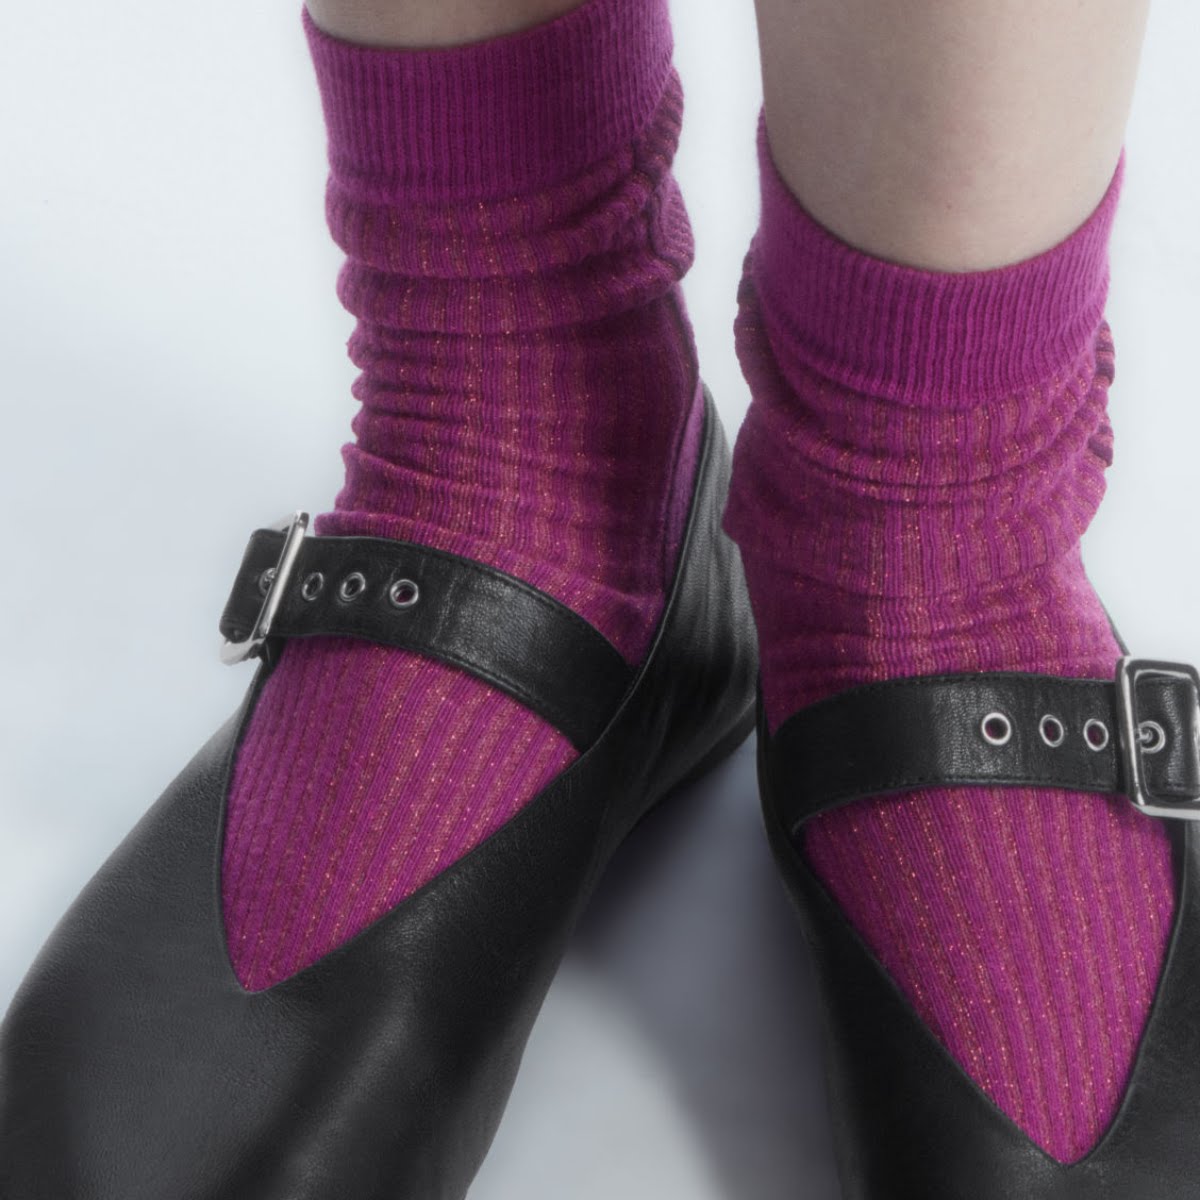 Two-Tone Sparkly Ribbed Socks, €9, COS